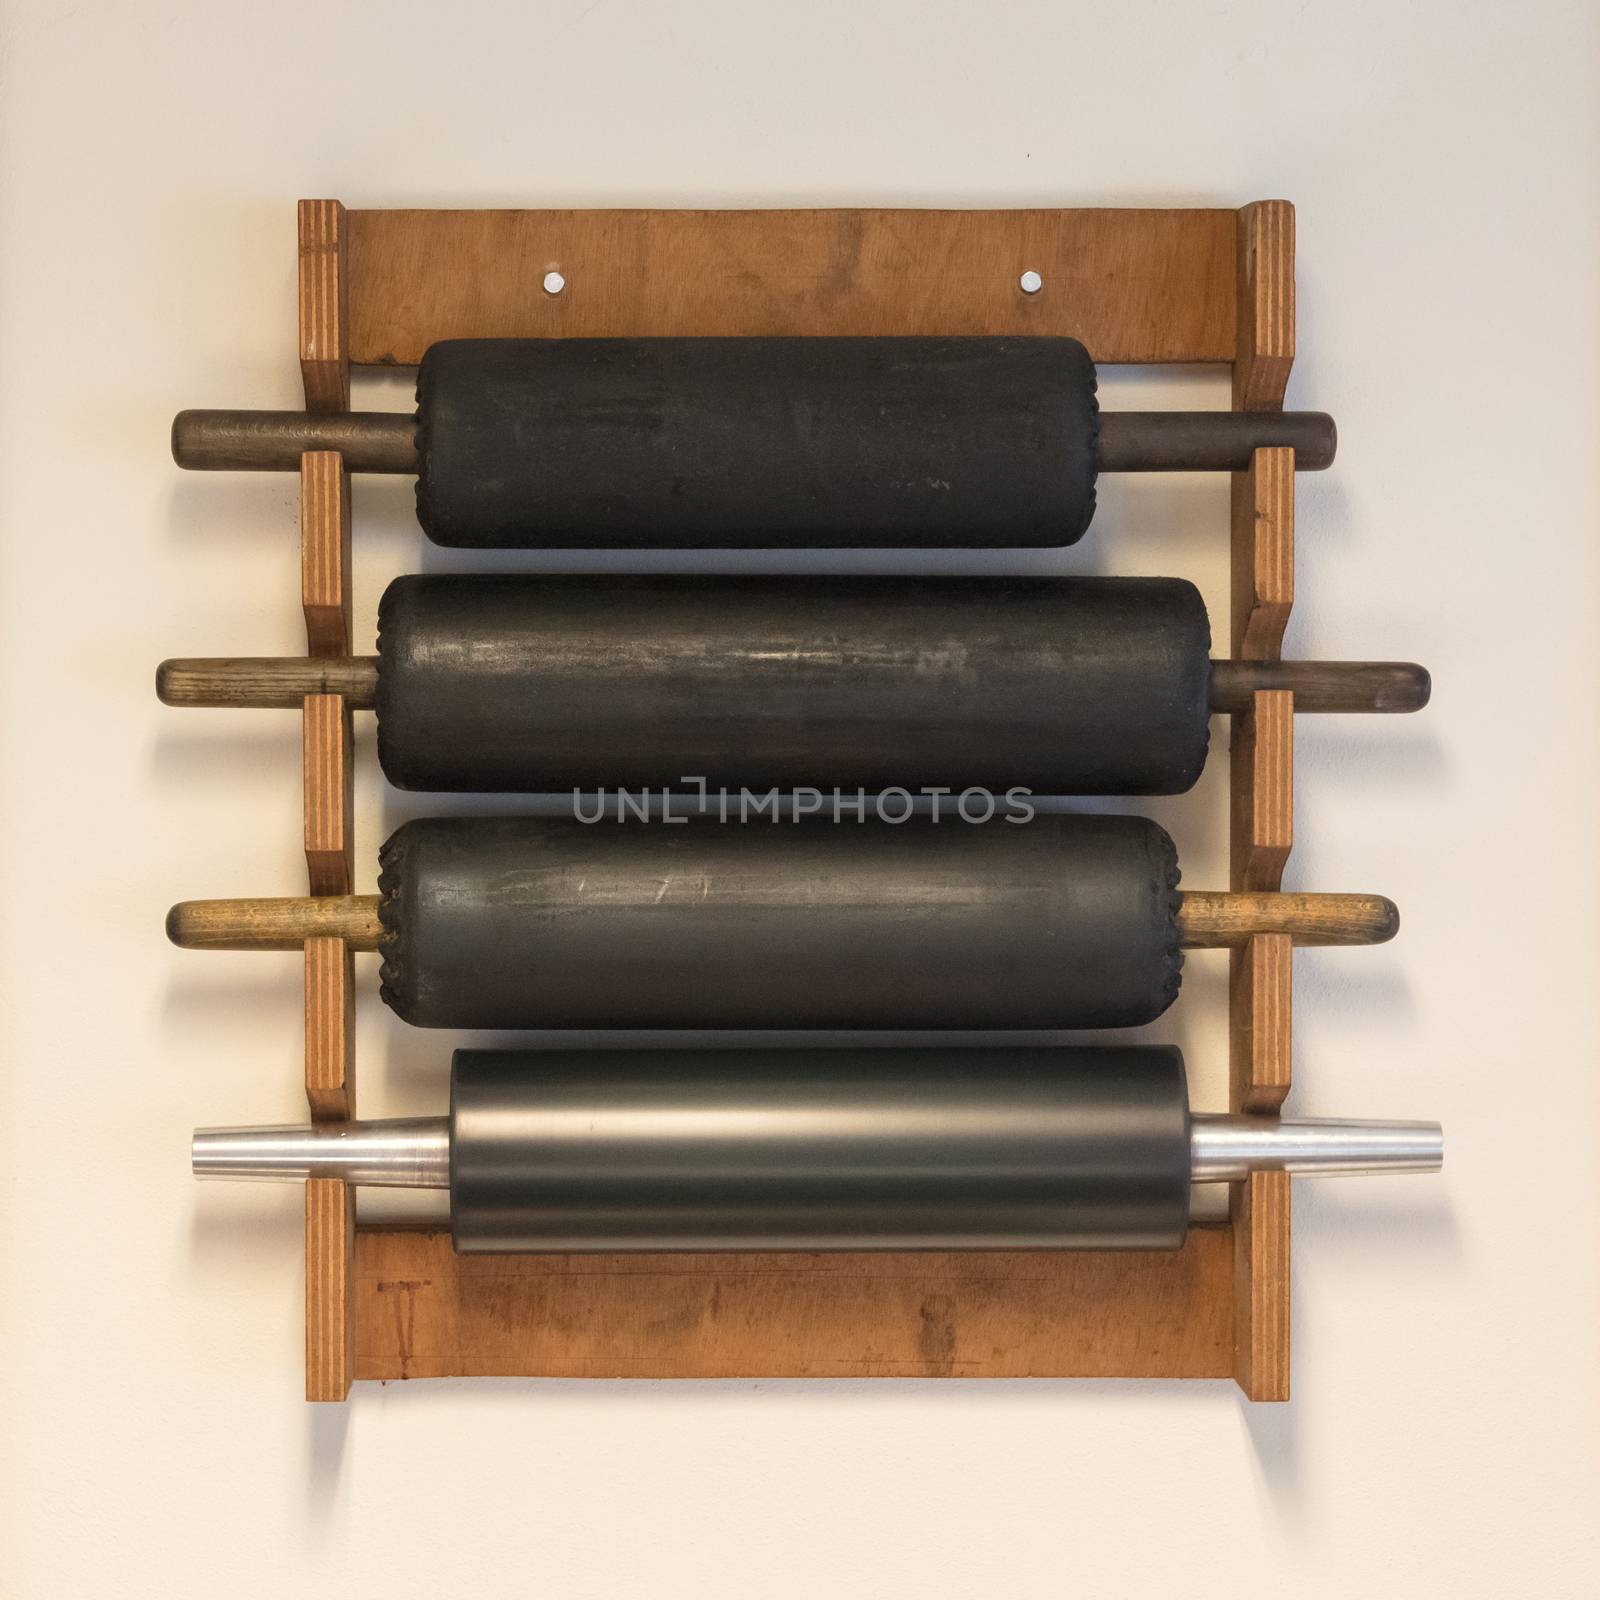 Collection of rolling pins hanging on a wall